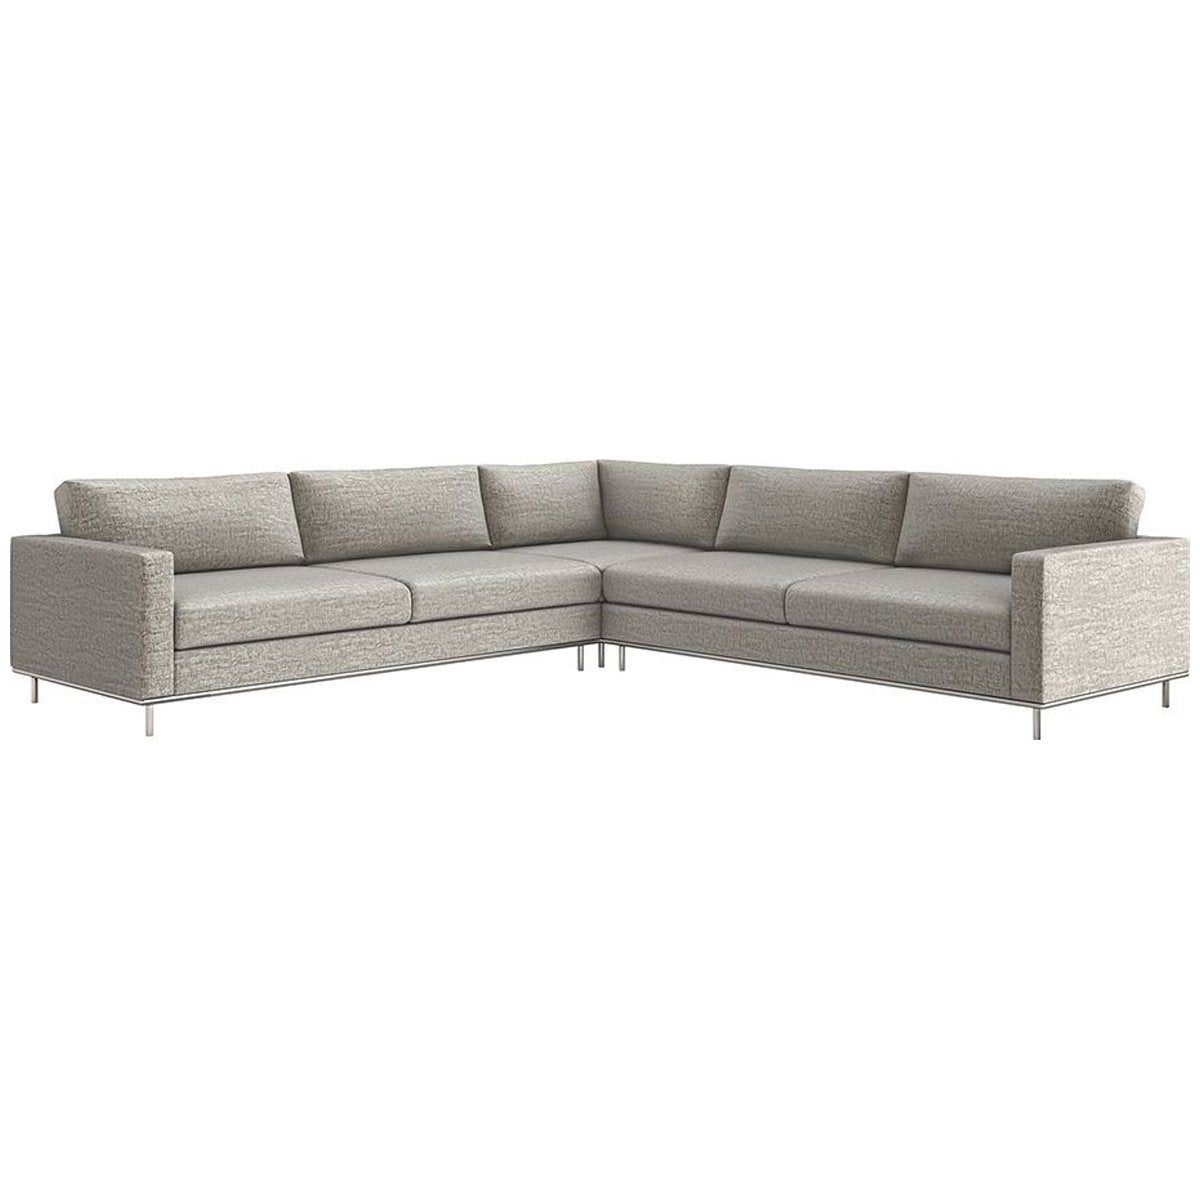 Interlude Home Valencia Feather 3-Piece Sectional